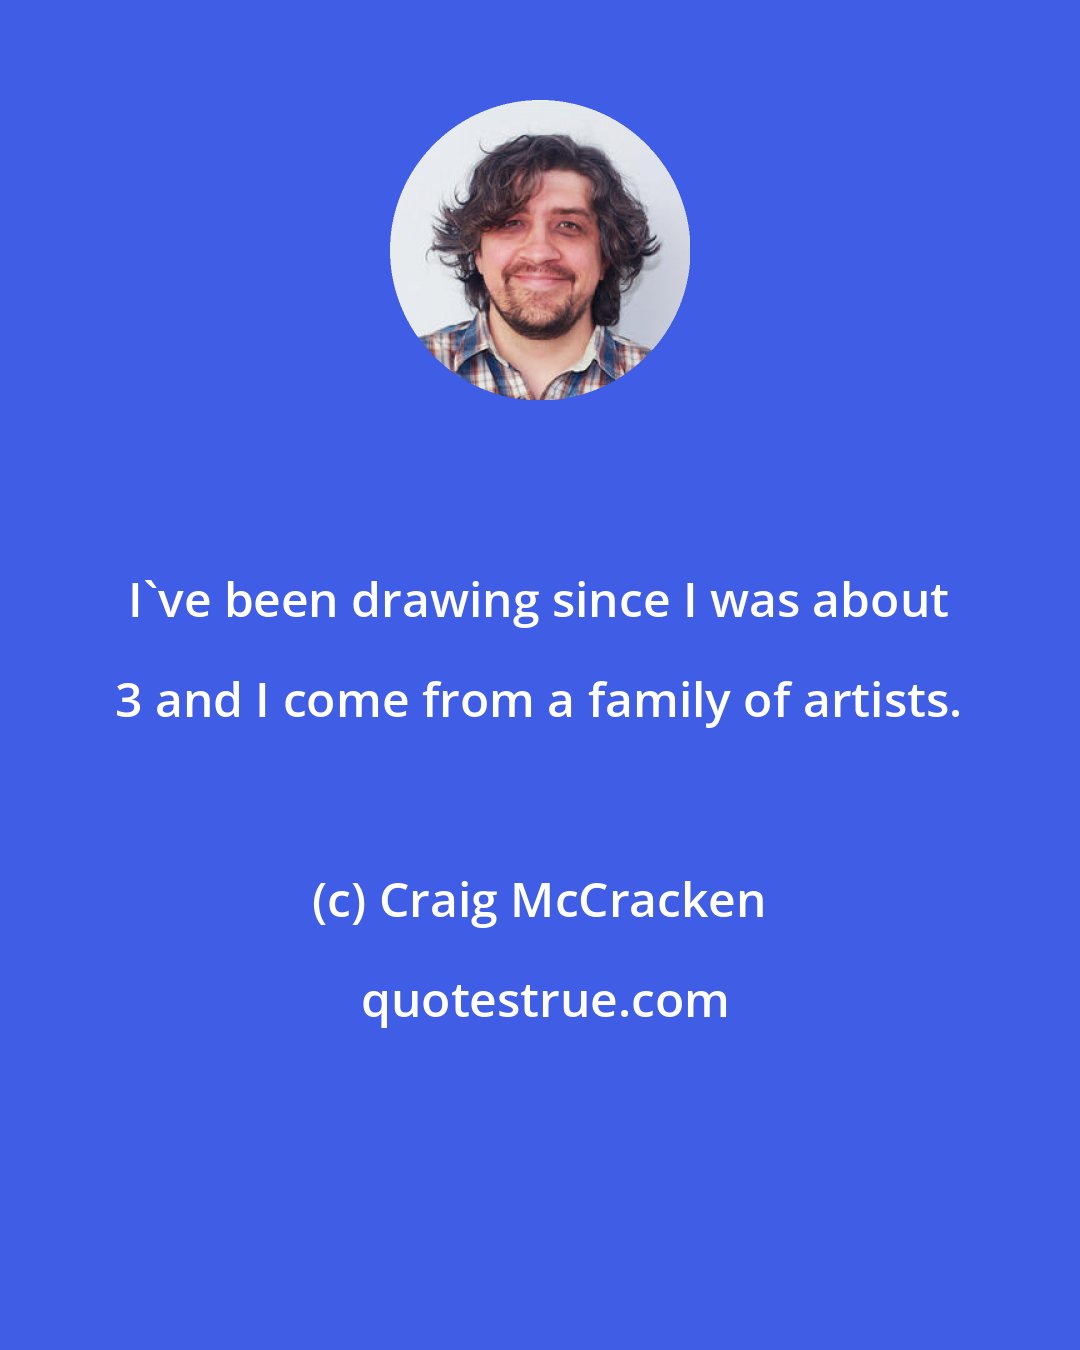 Craig McCracken: I've been drawing since I was about 3 and I come from a family of artists.